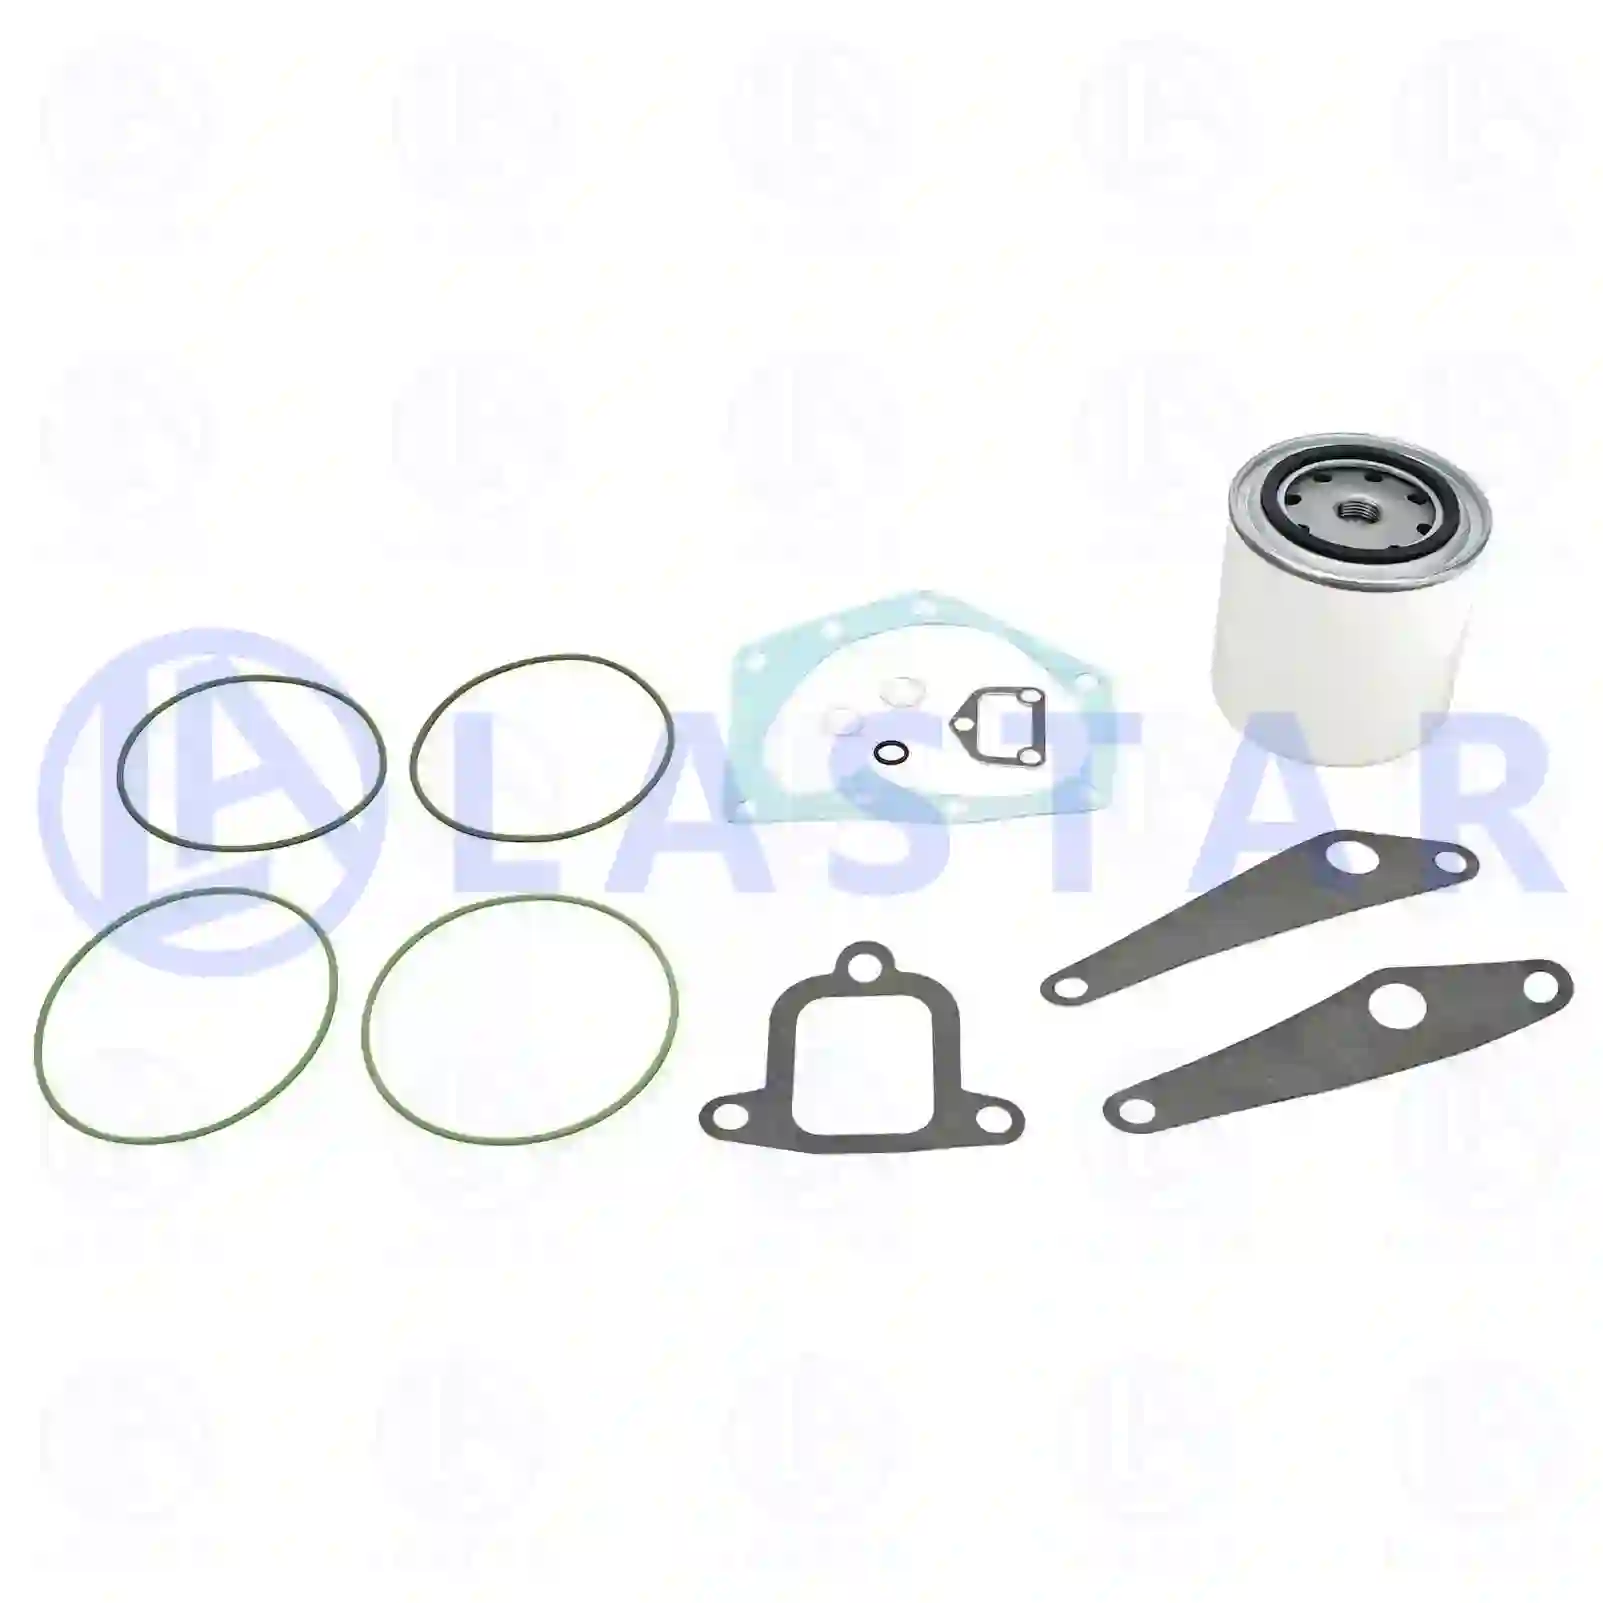 Gasket kit, oil cooler, with filter, 77703047, 551451, ZG01354-0008, ||  77703047 Lastar Spare Part | Truck Spare Parts, Auotomotive Spare Parts Gasket kit, oil cooler, with filter, 77703047, 551451, ZG01354-0008, ||  77703047 Lastar Spare Part | Truck Spare Parts, Auotomotive Spare Parts